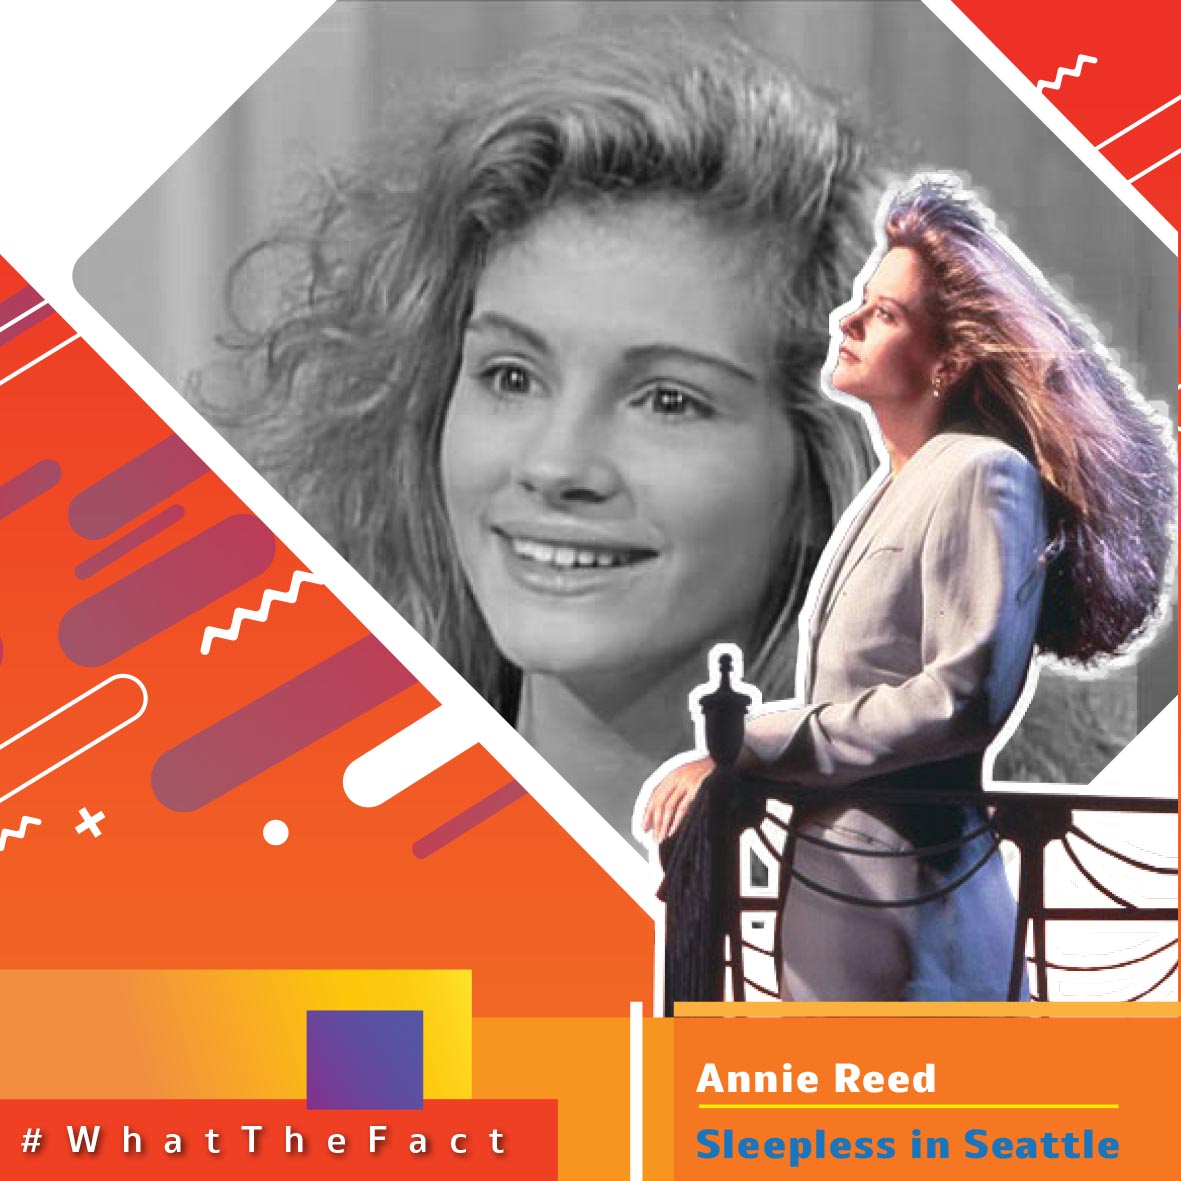 annie reed ใน sleepless in seattle